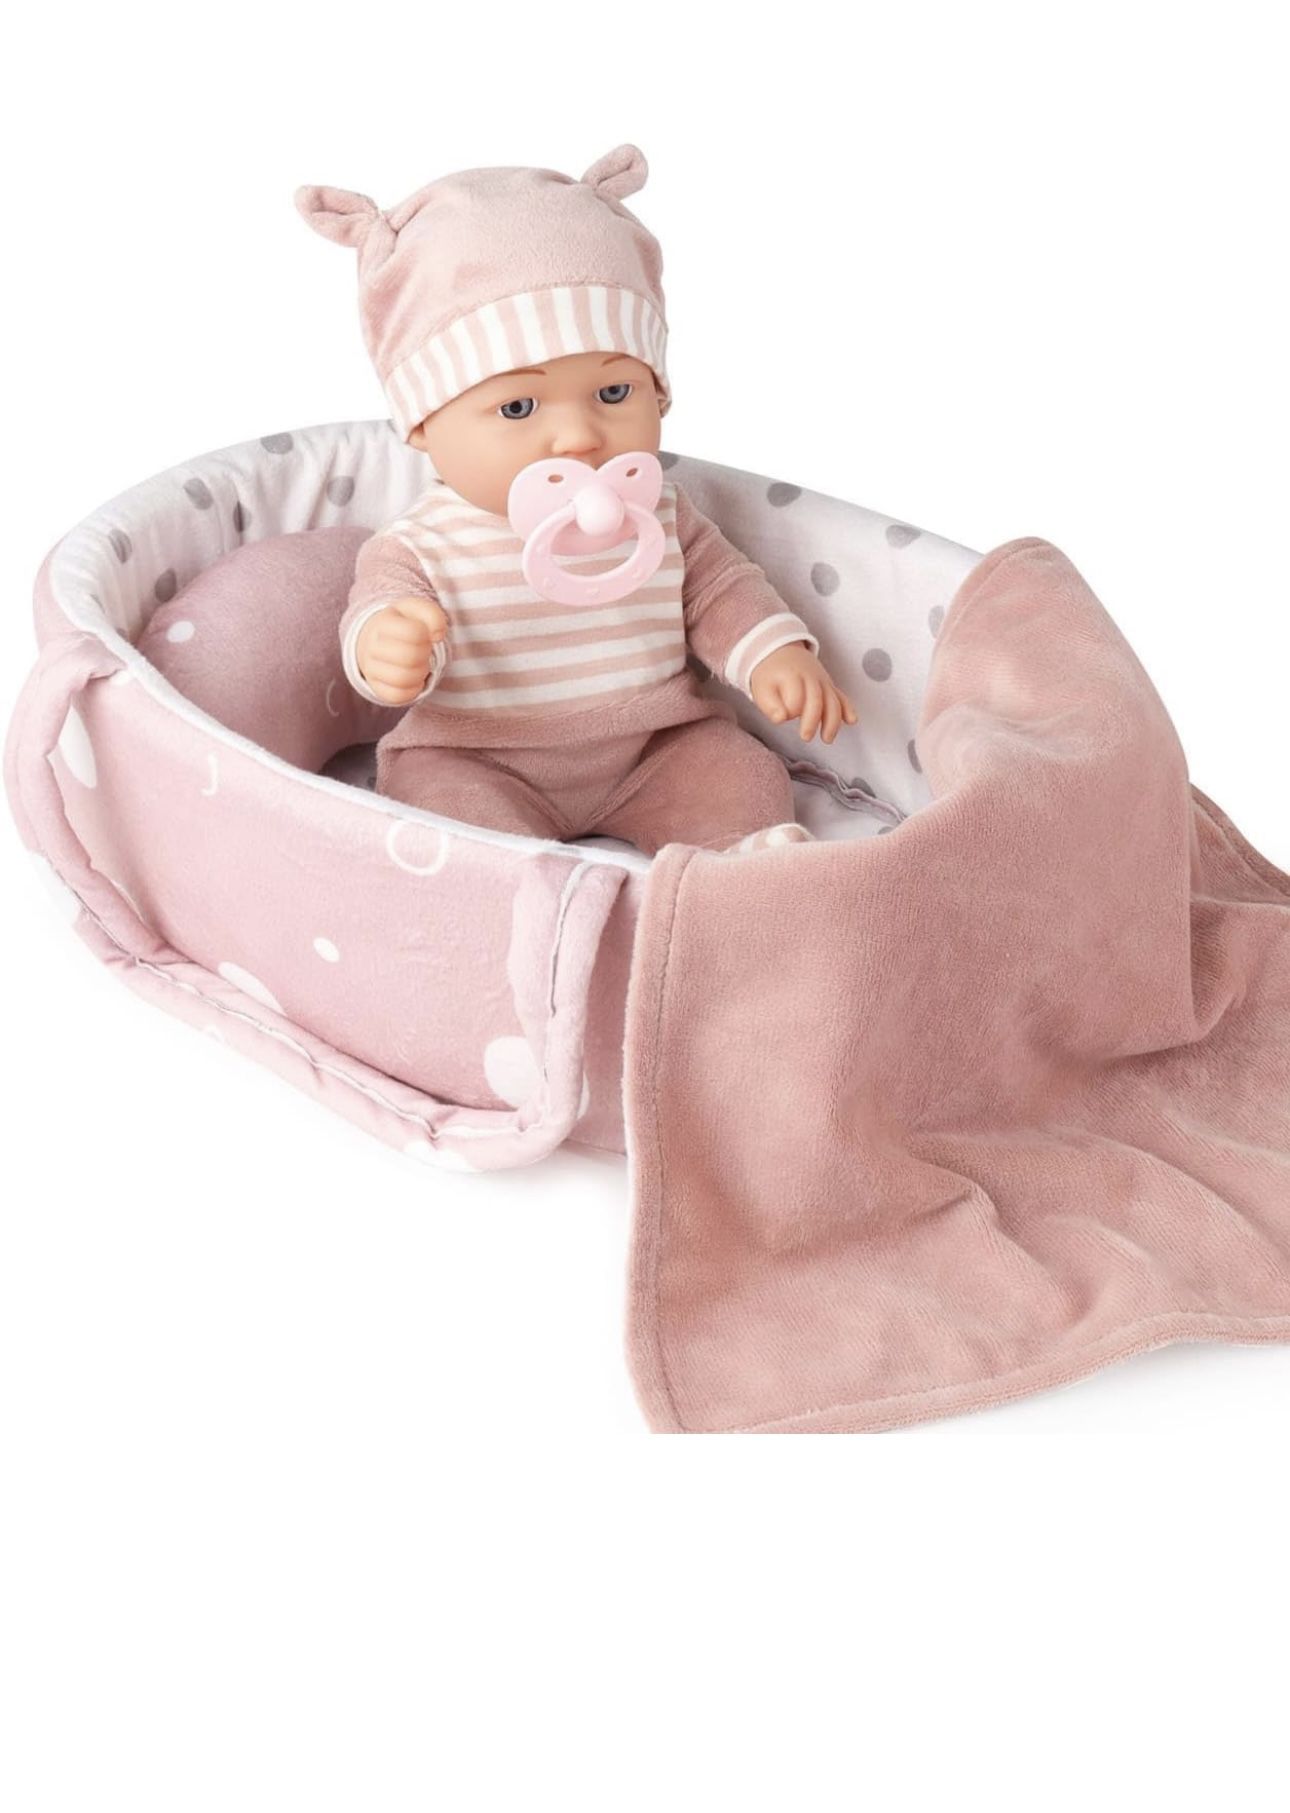 Enjoyin 12'' Baby Doll Playset with Washable Doll Accessories Includes Carrier Bassinet Bed, Pacifier, Blanket, and Pillow, First Baby Dolls for Toddl